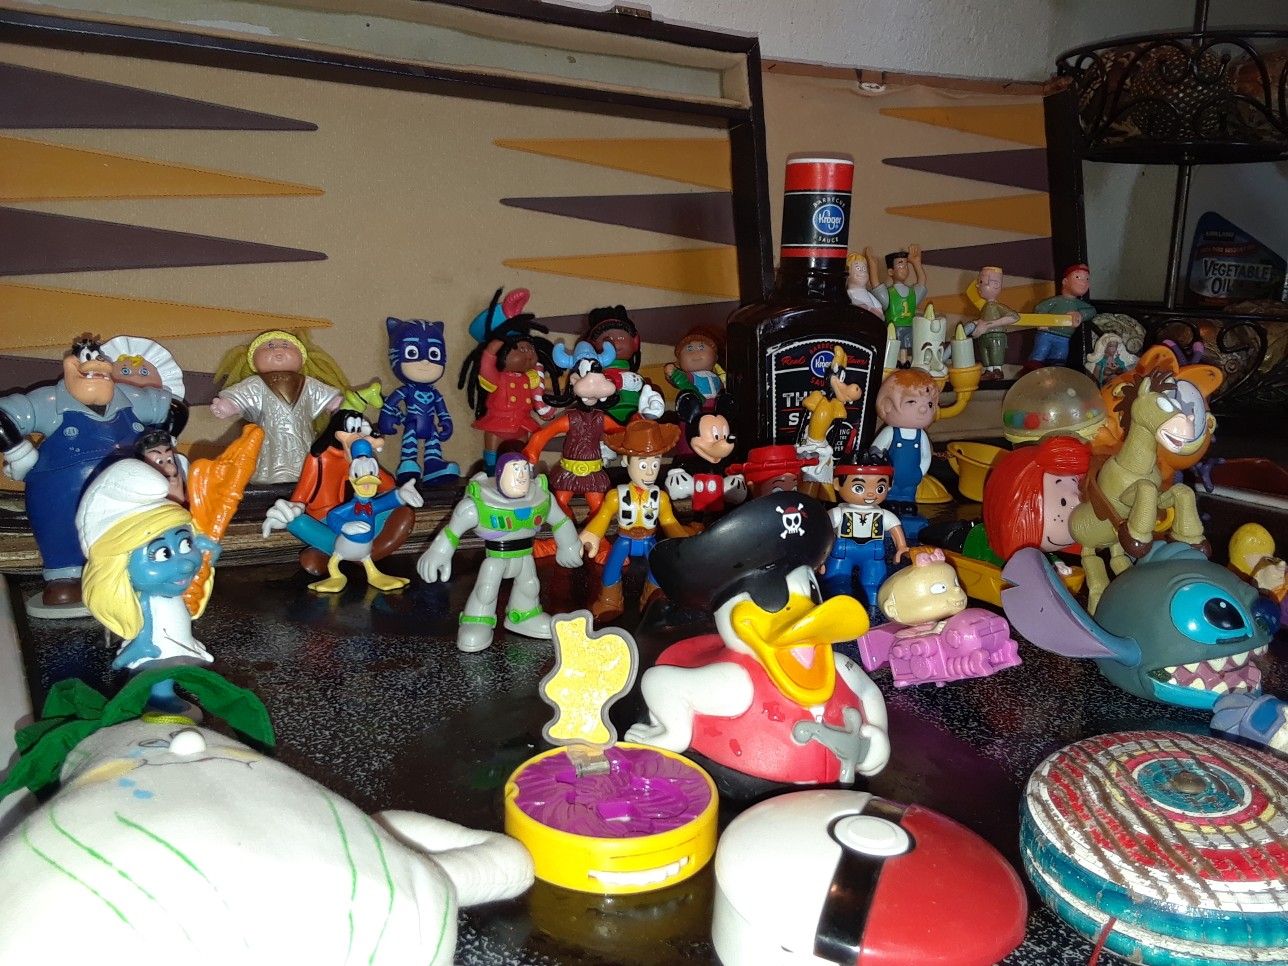 Over 45 collectable vintage toys